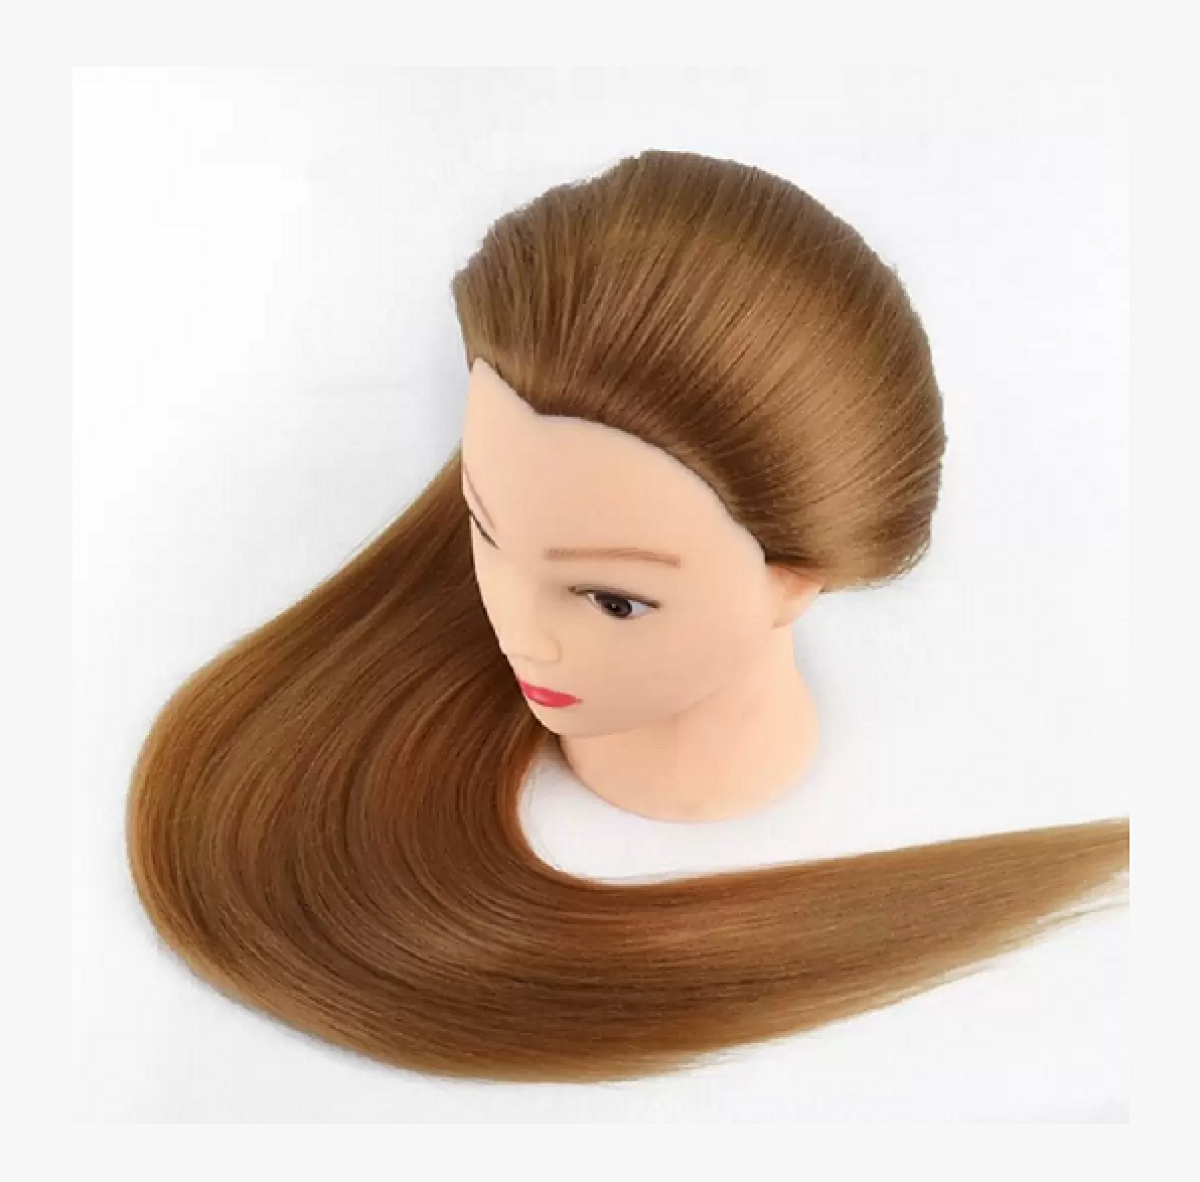 Natural Real Hair Head Dummy for Hair Styling at best price in Nepal | Guna  Cosmetics